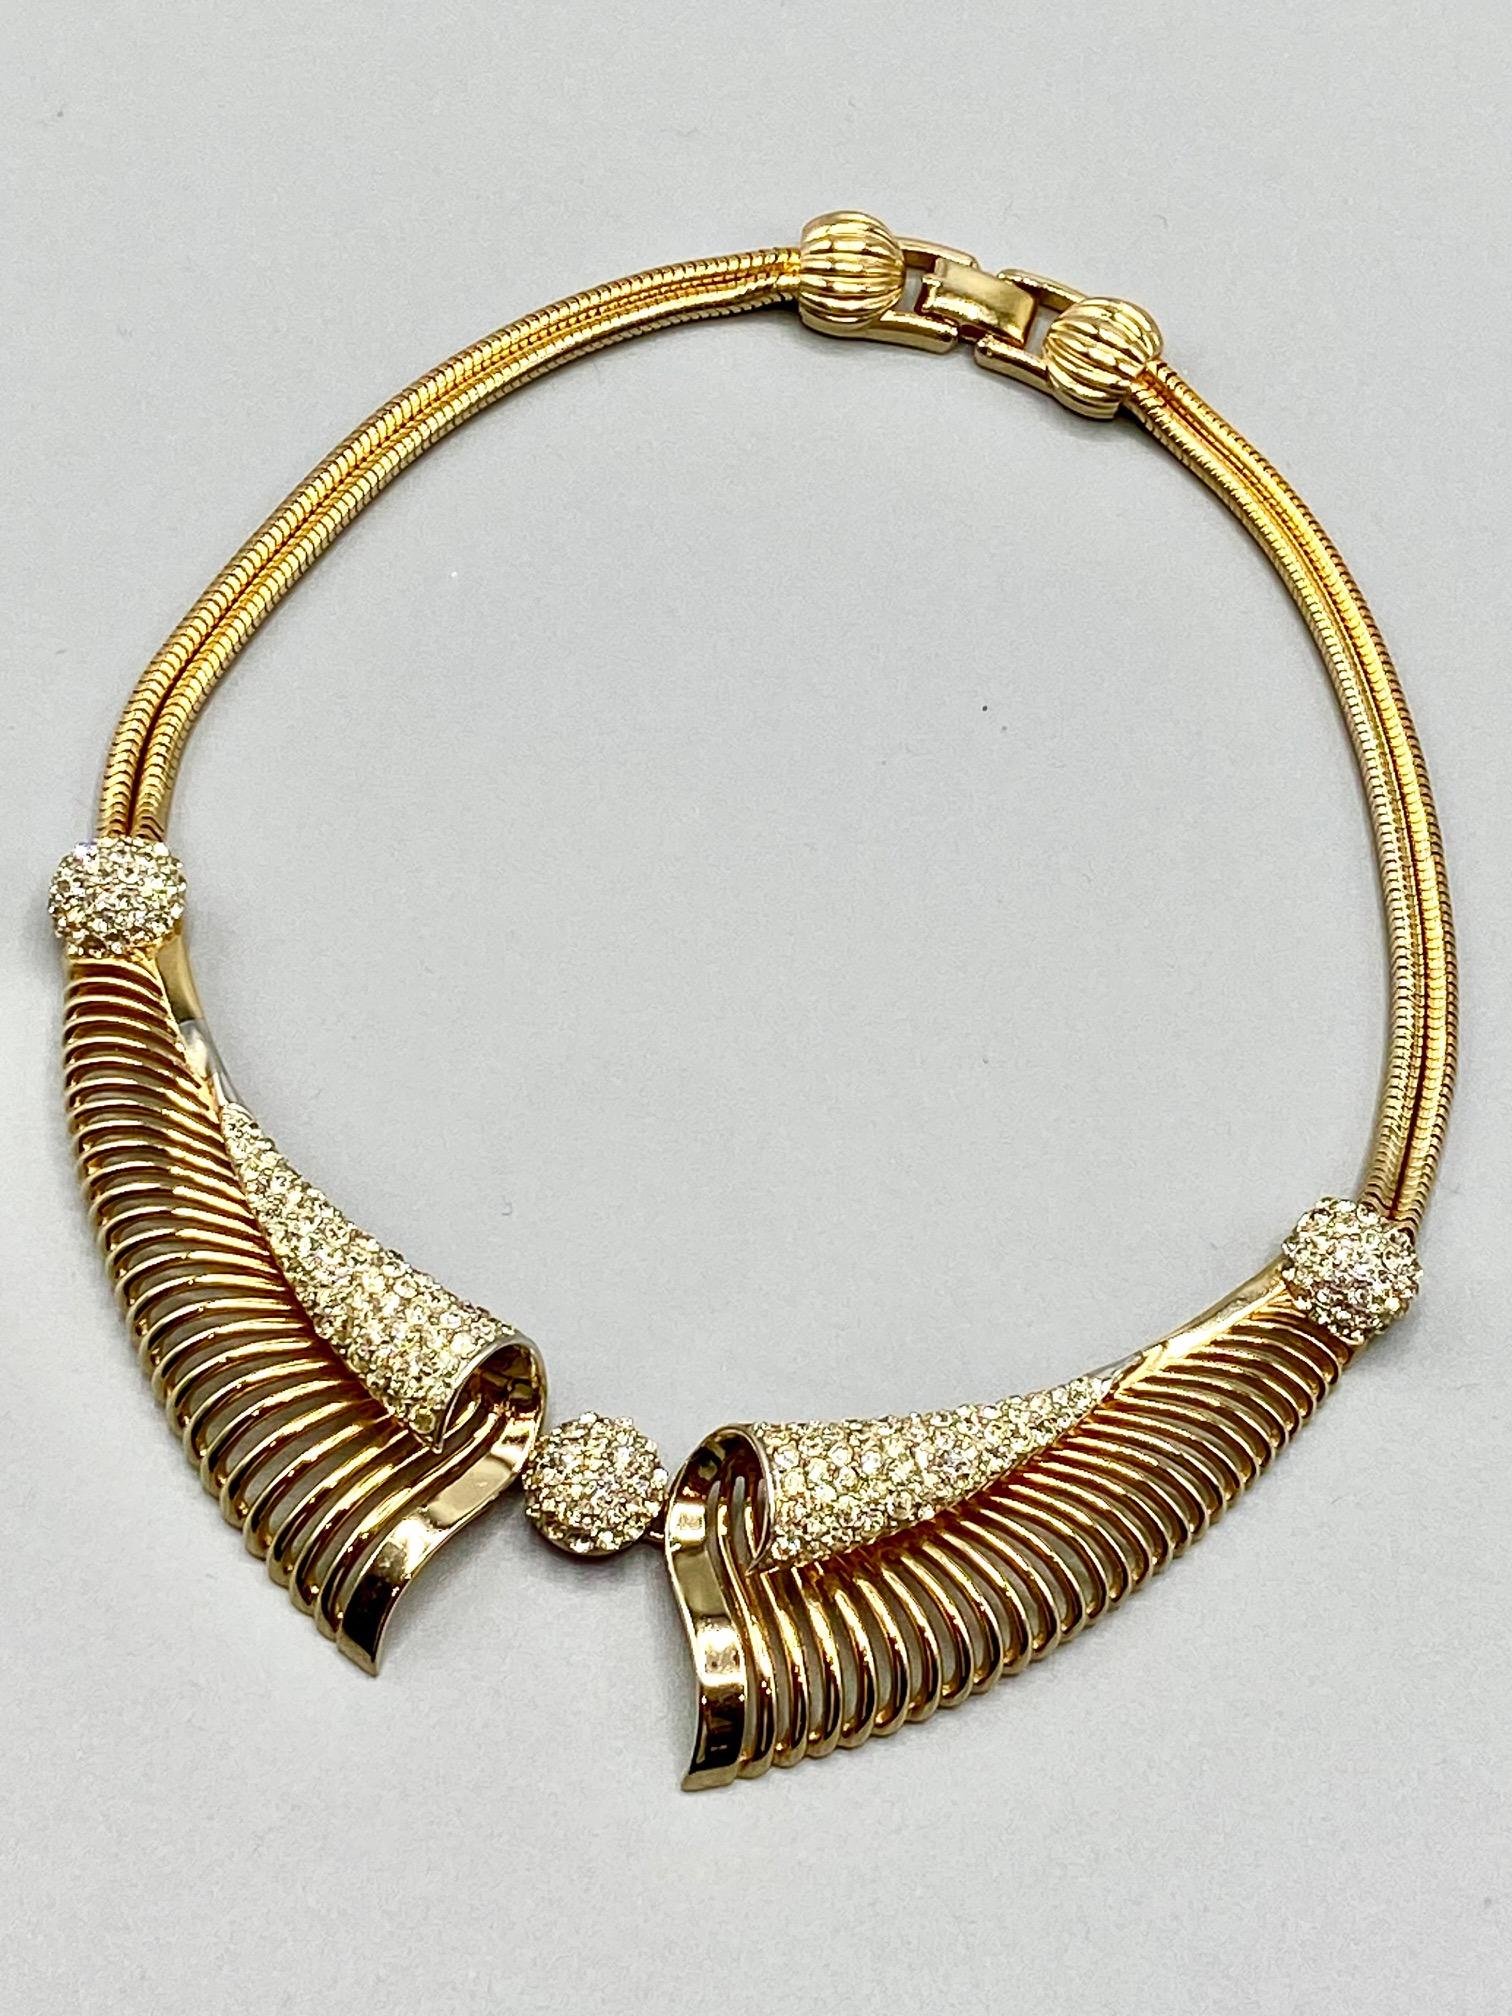 Presented is an elegant and unique vintage 1950s necklace by high end American fashion jewelry company Marcel Boucher. The necklace has a unique scroll collar design. The two sides of the bib front and the double snake chain strands are gold tone.